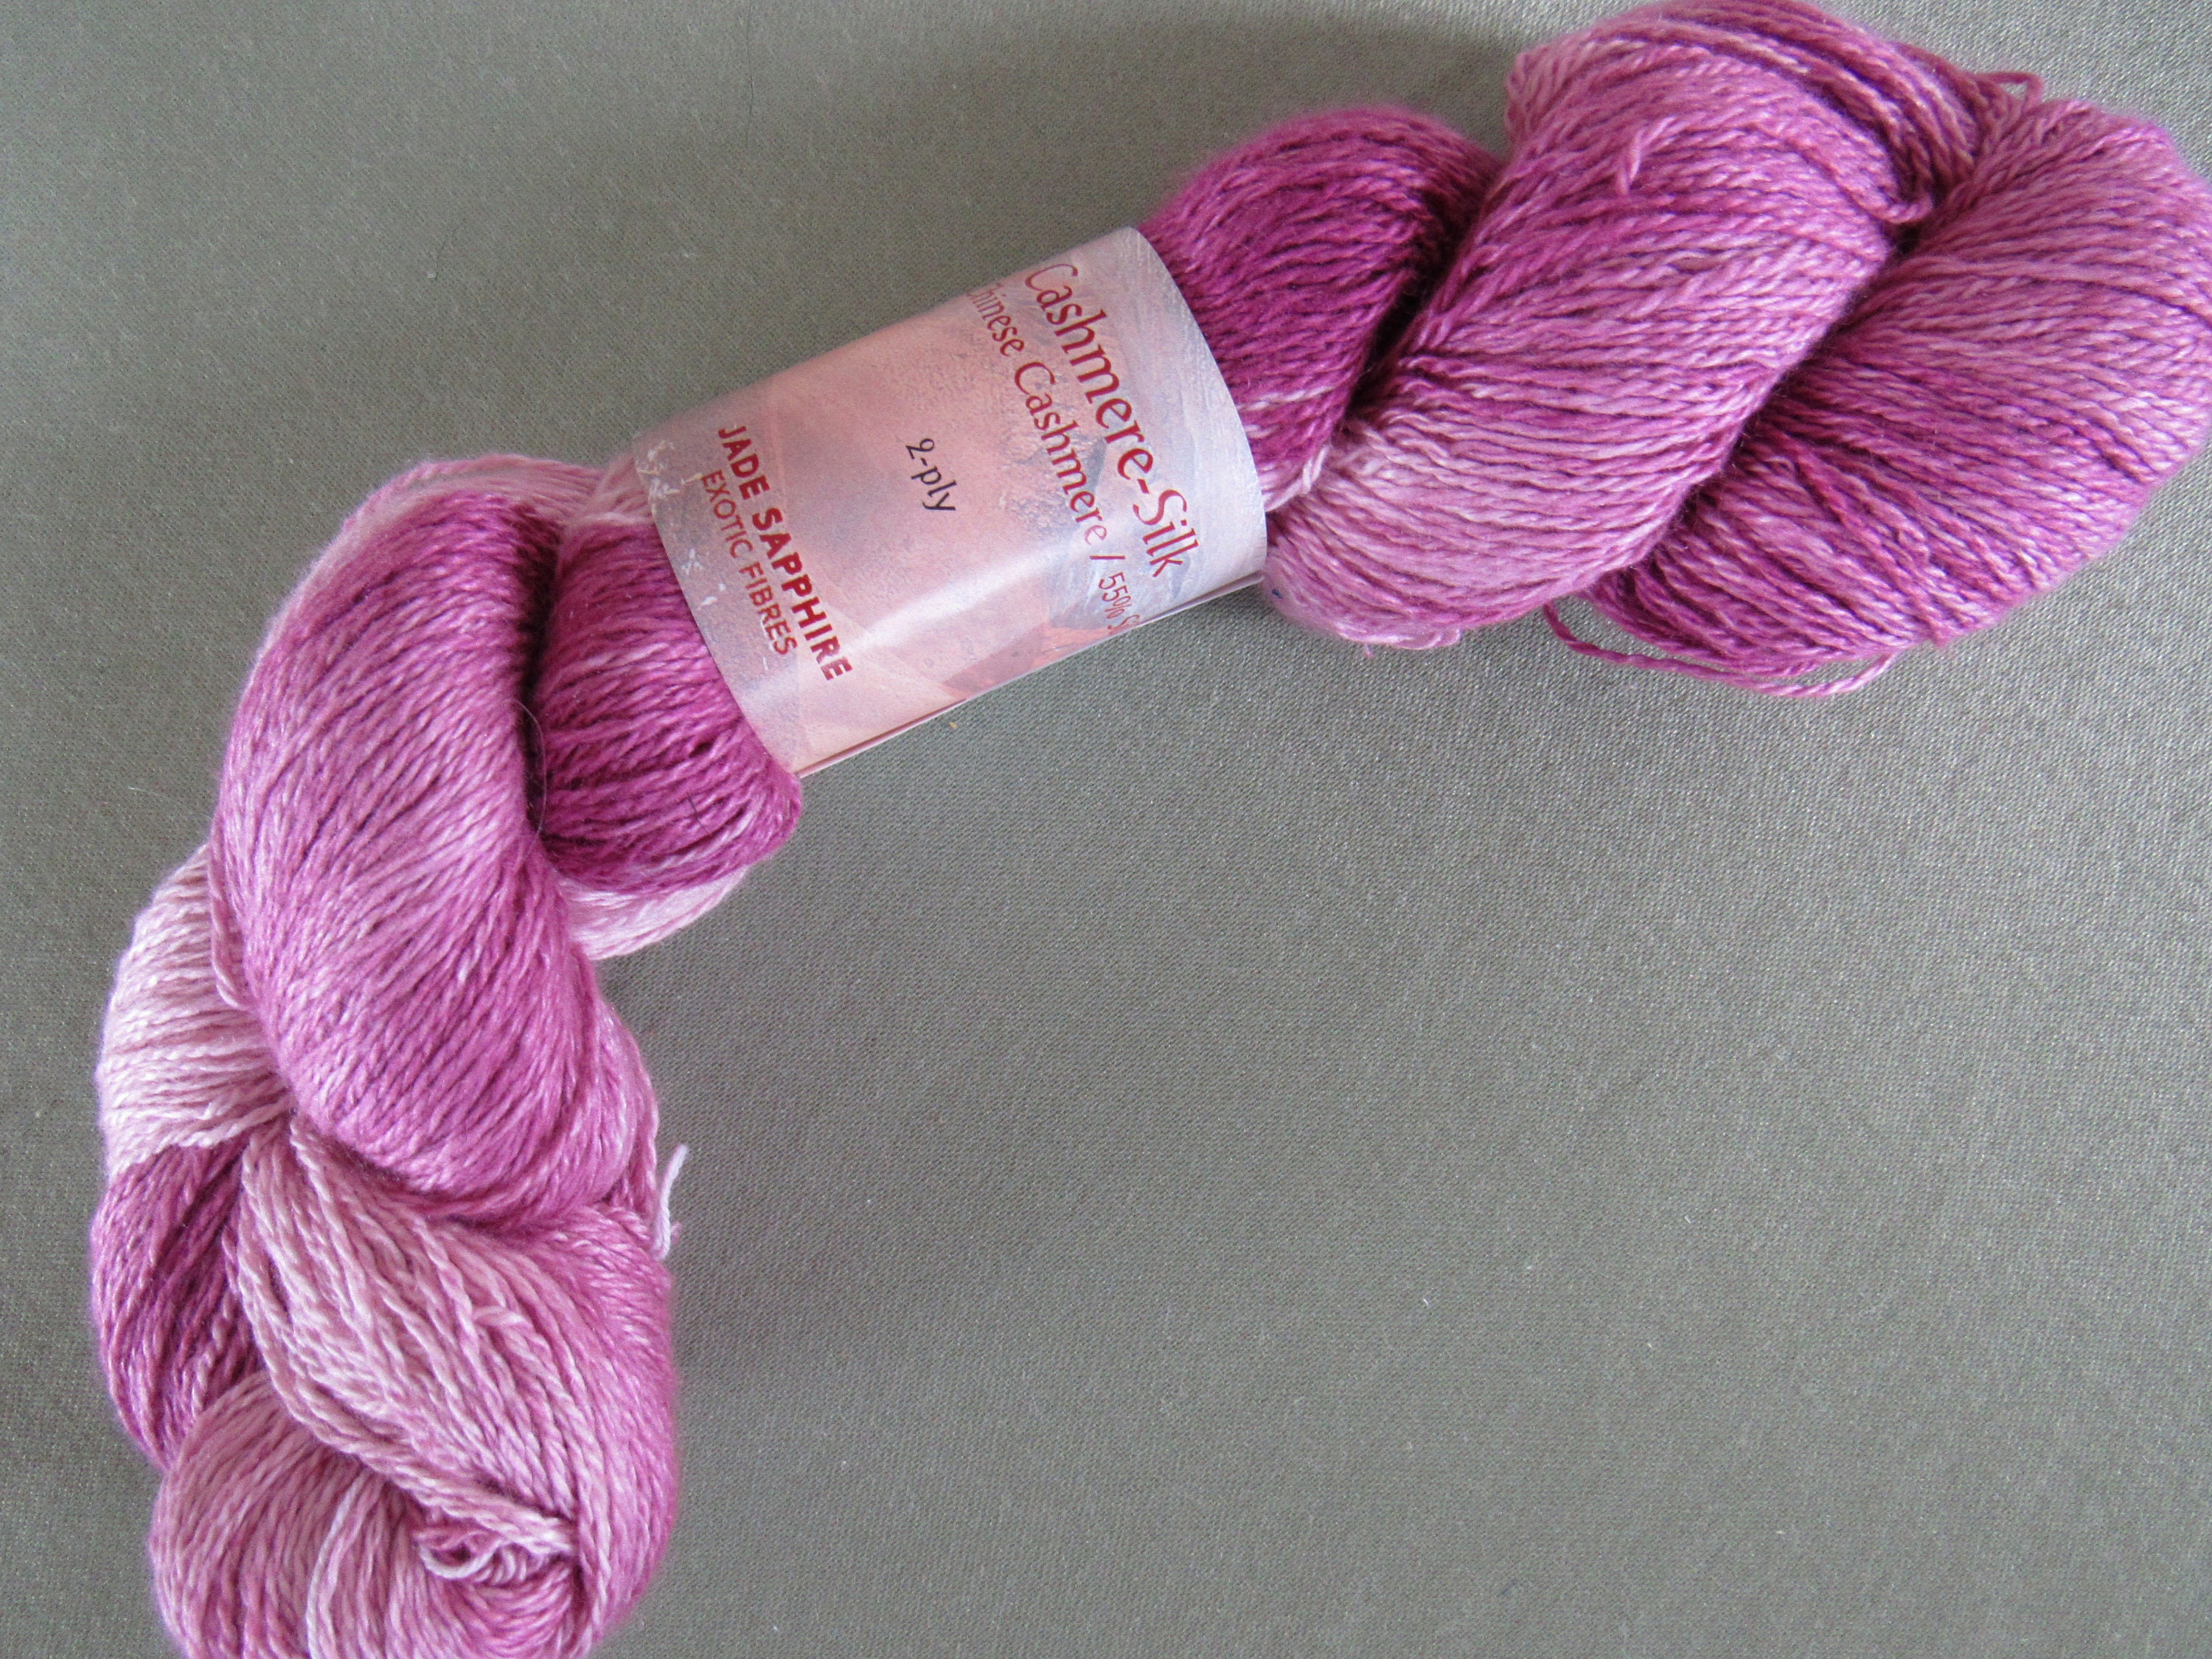 Recycled Silk Cashmere Lace Weight Yarn in Tan – thoughtful rose